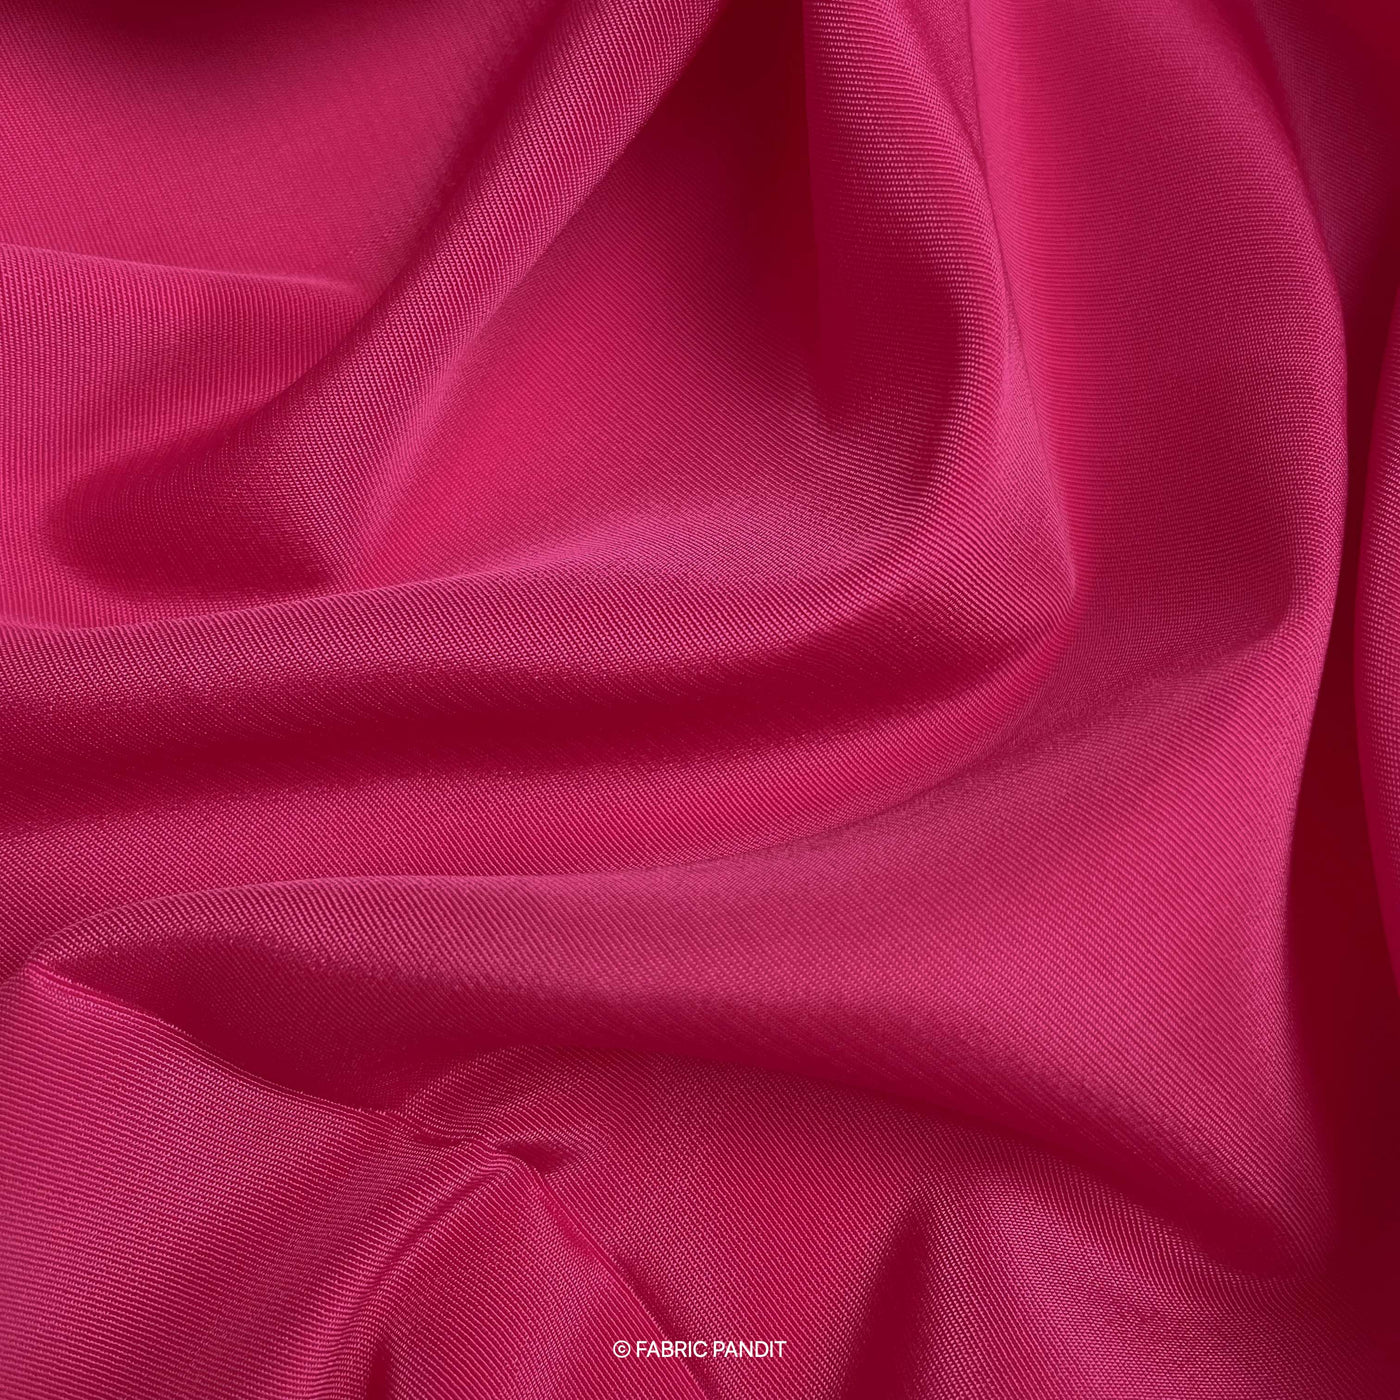 Fabric Pandit Cut Piece 0.75M (CUT PIECE) Mulberry Color Premium French Crepe Fabric (Width 44 inches)